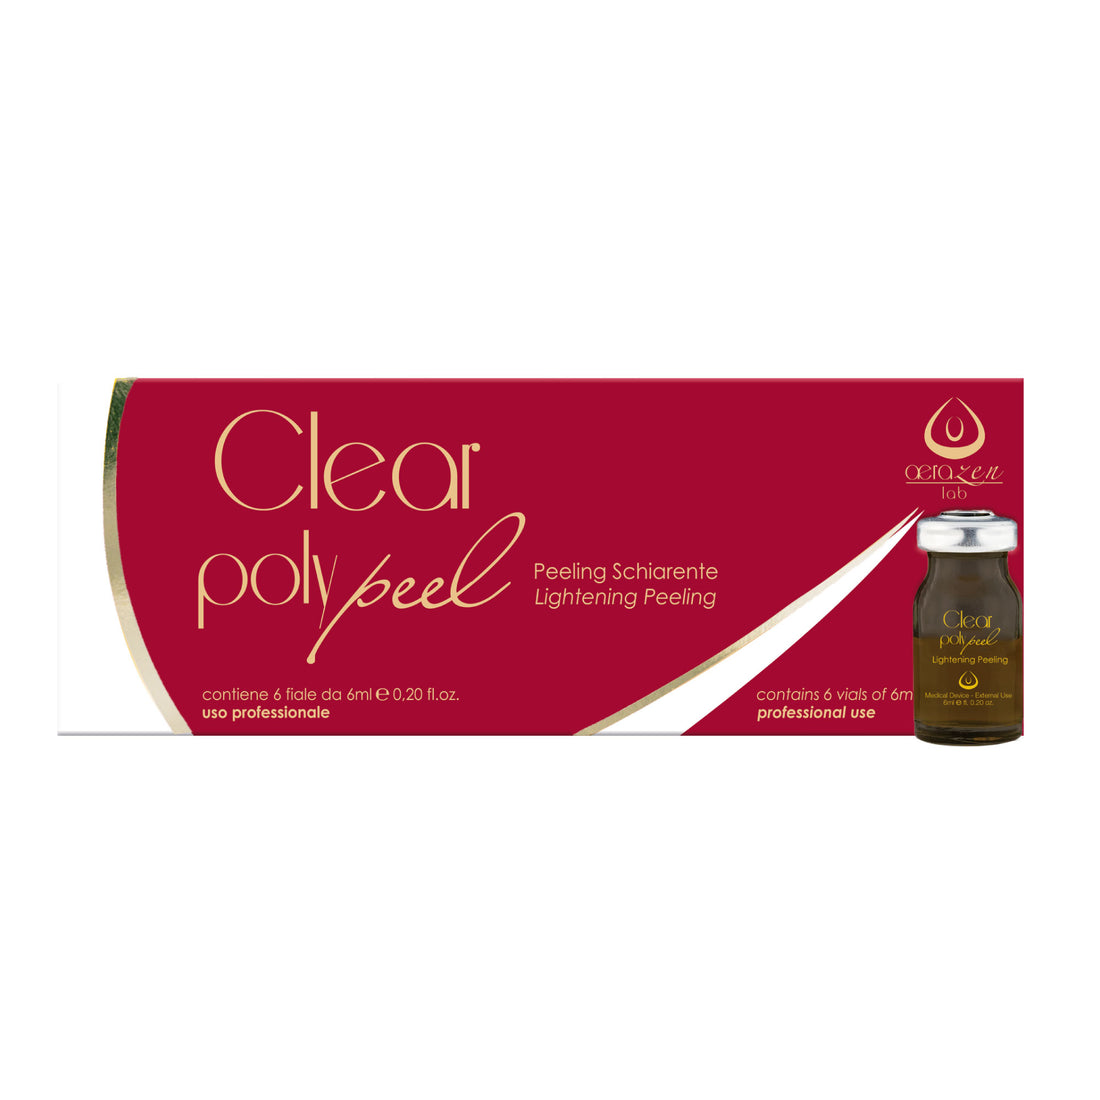 CLEAR POLY PEELING - Lightening Peeling for the Treatment of ACNE in the Active Phase - Aerazen Lab.